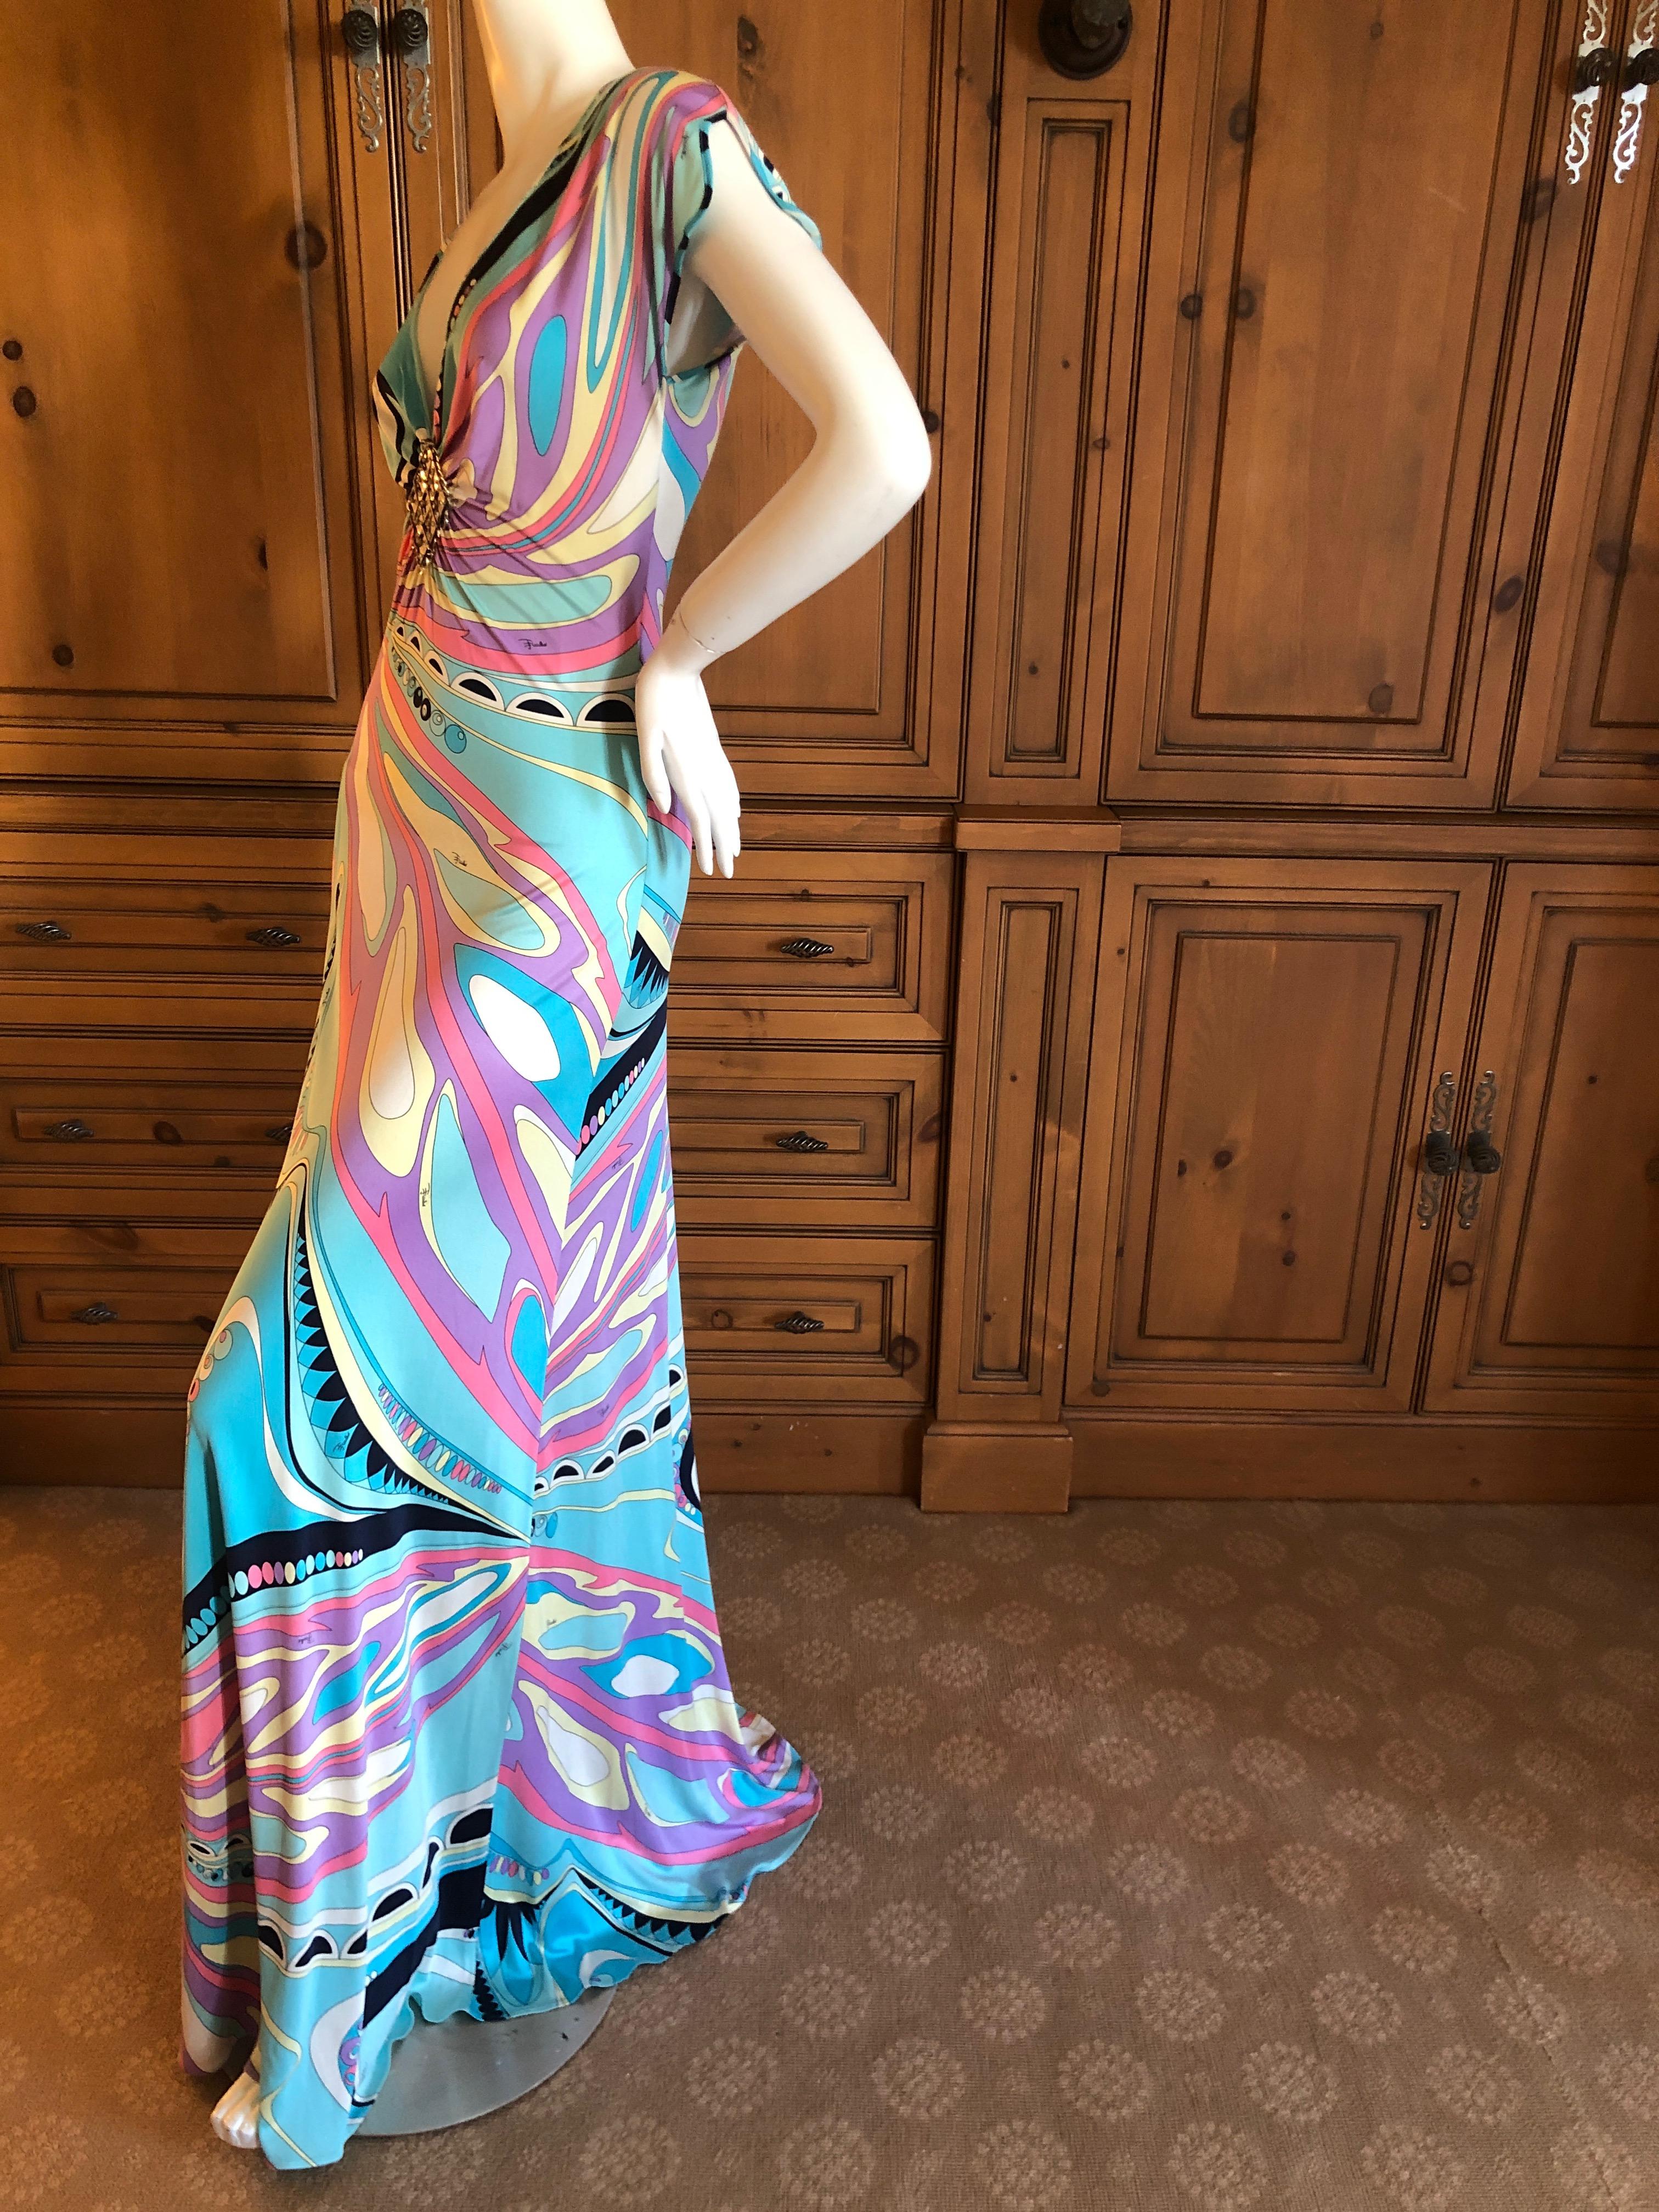 Emilio Pucci Wonderful Low Cut Embellished Silk Jersey Evening Dress Size 6  In Excellent Condition For Sale In Cloverdale, CA